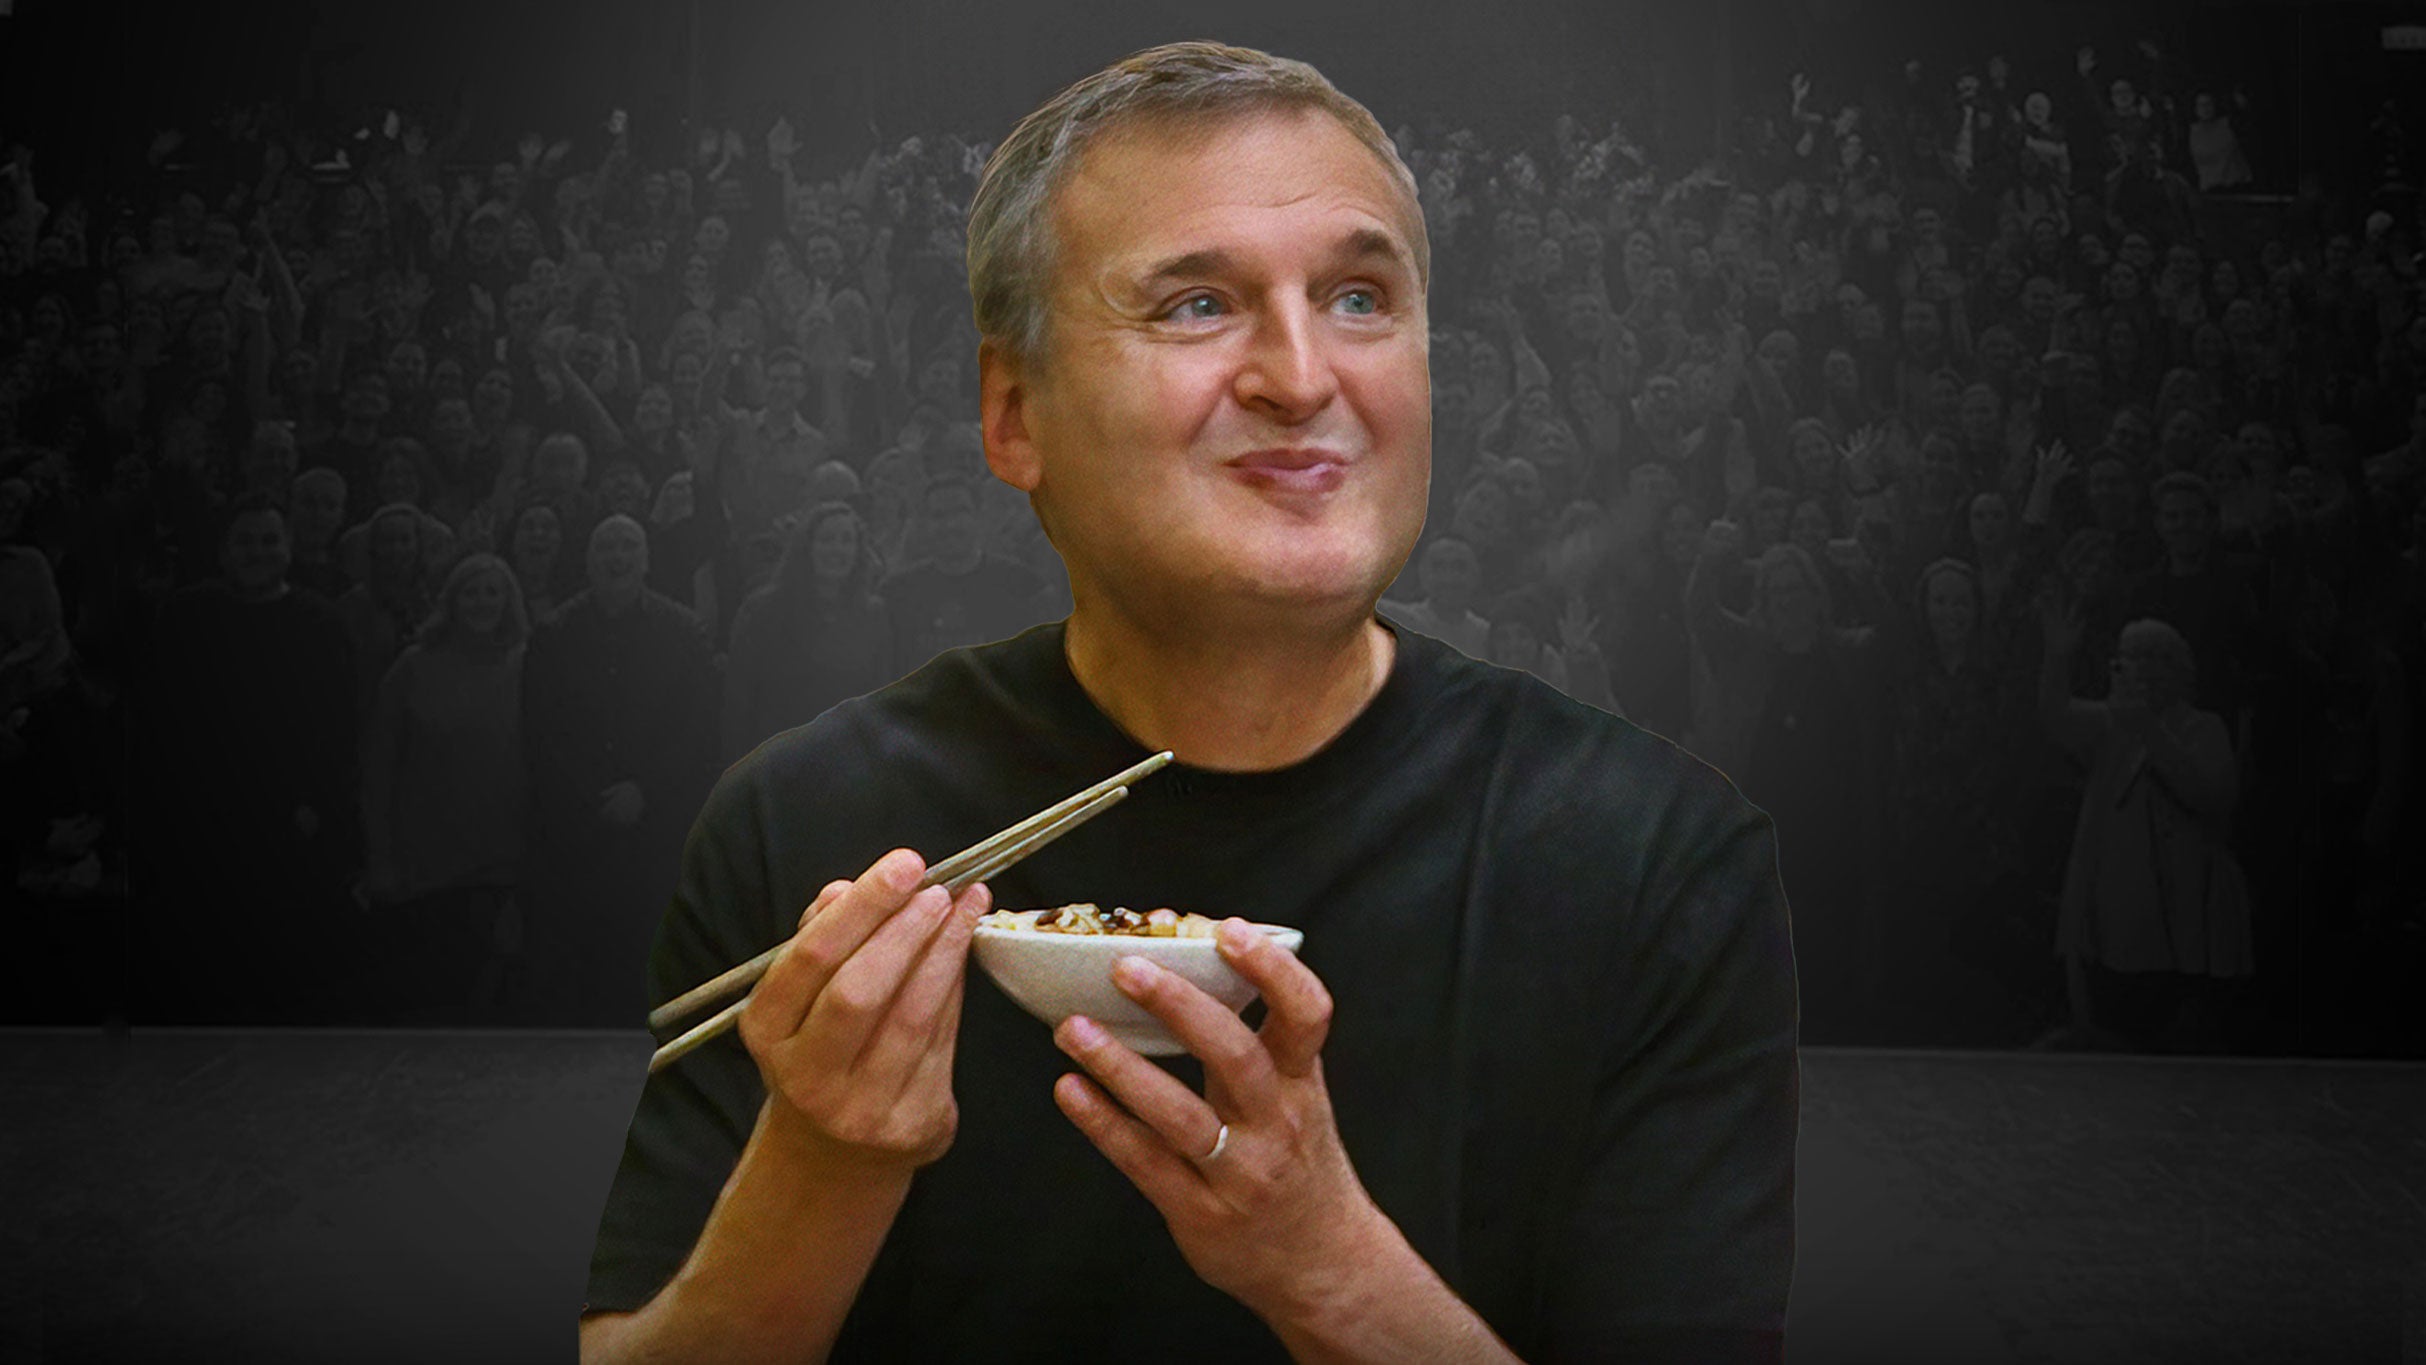 An Evening With Phil Rosenthal Of "Somebody Feed Phil" in Atlanta promo photo for Live Nation presale offer code